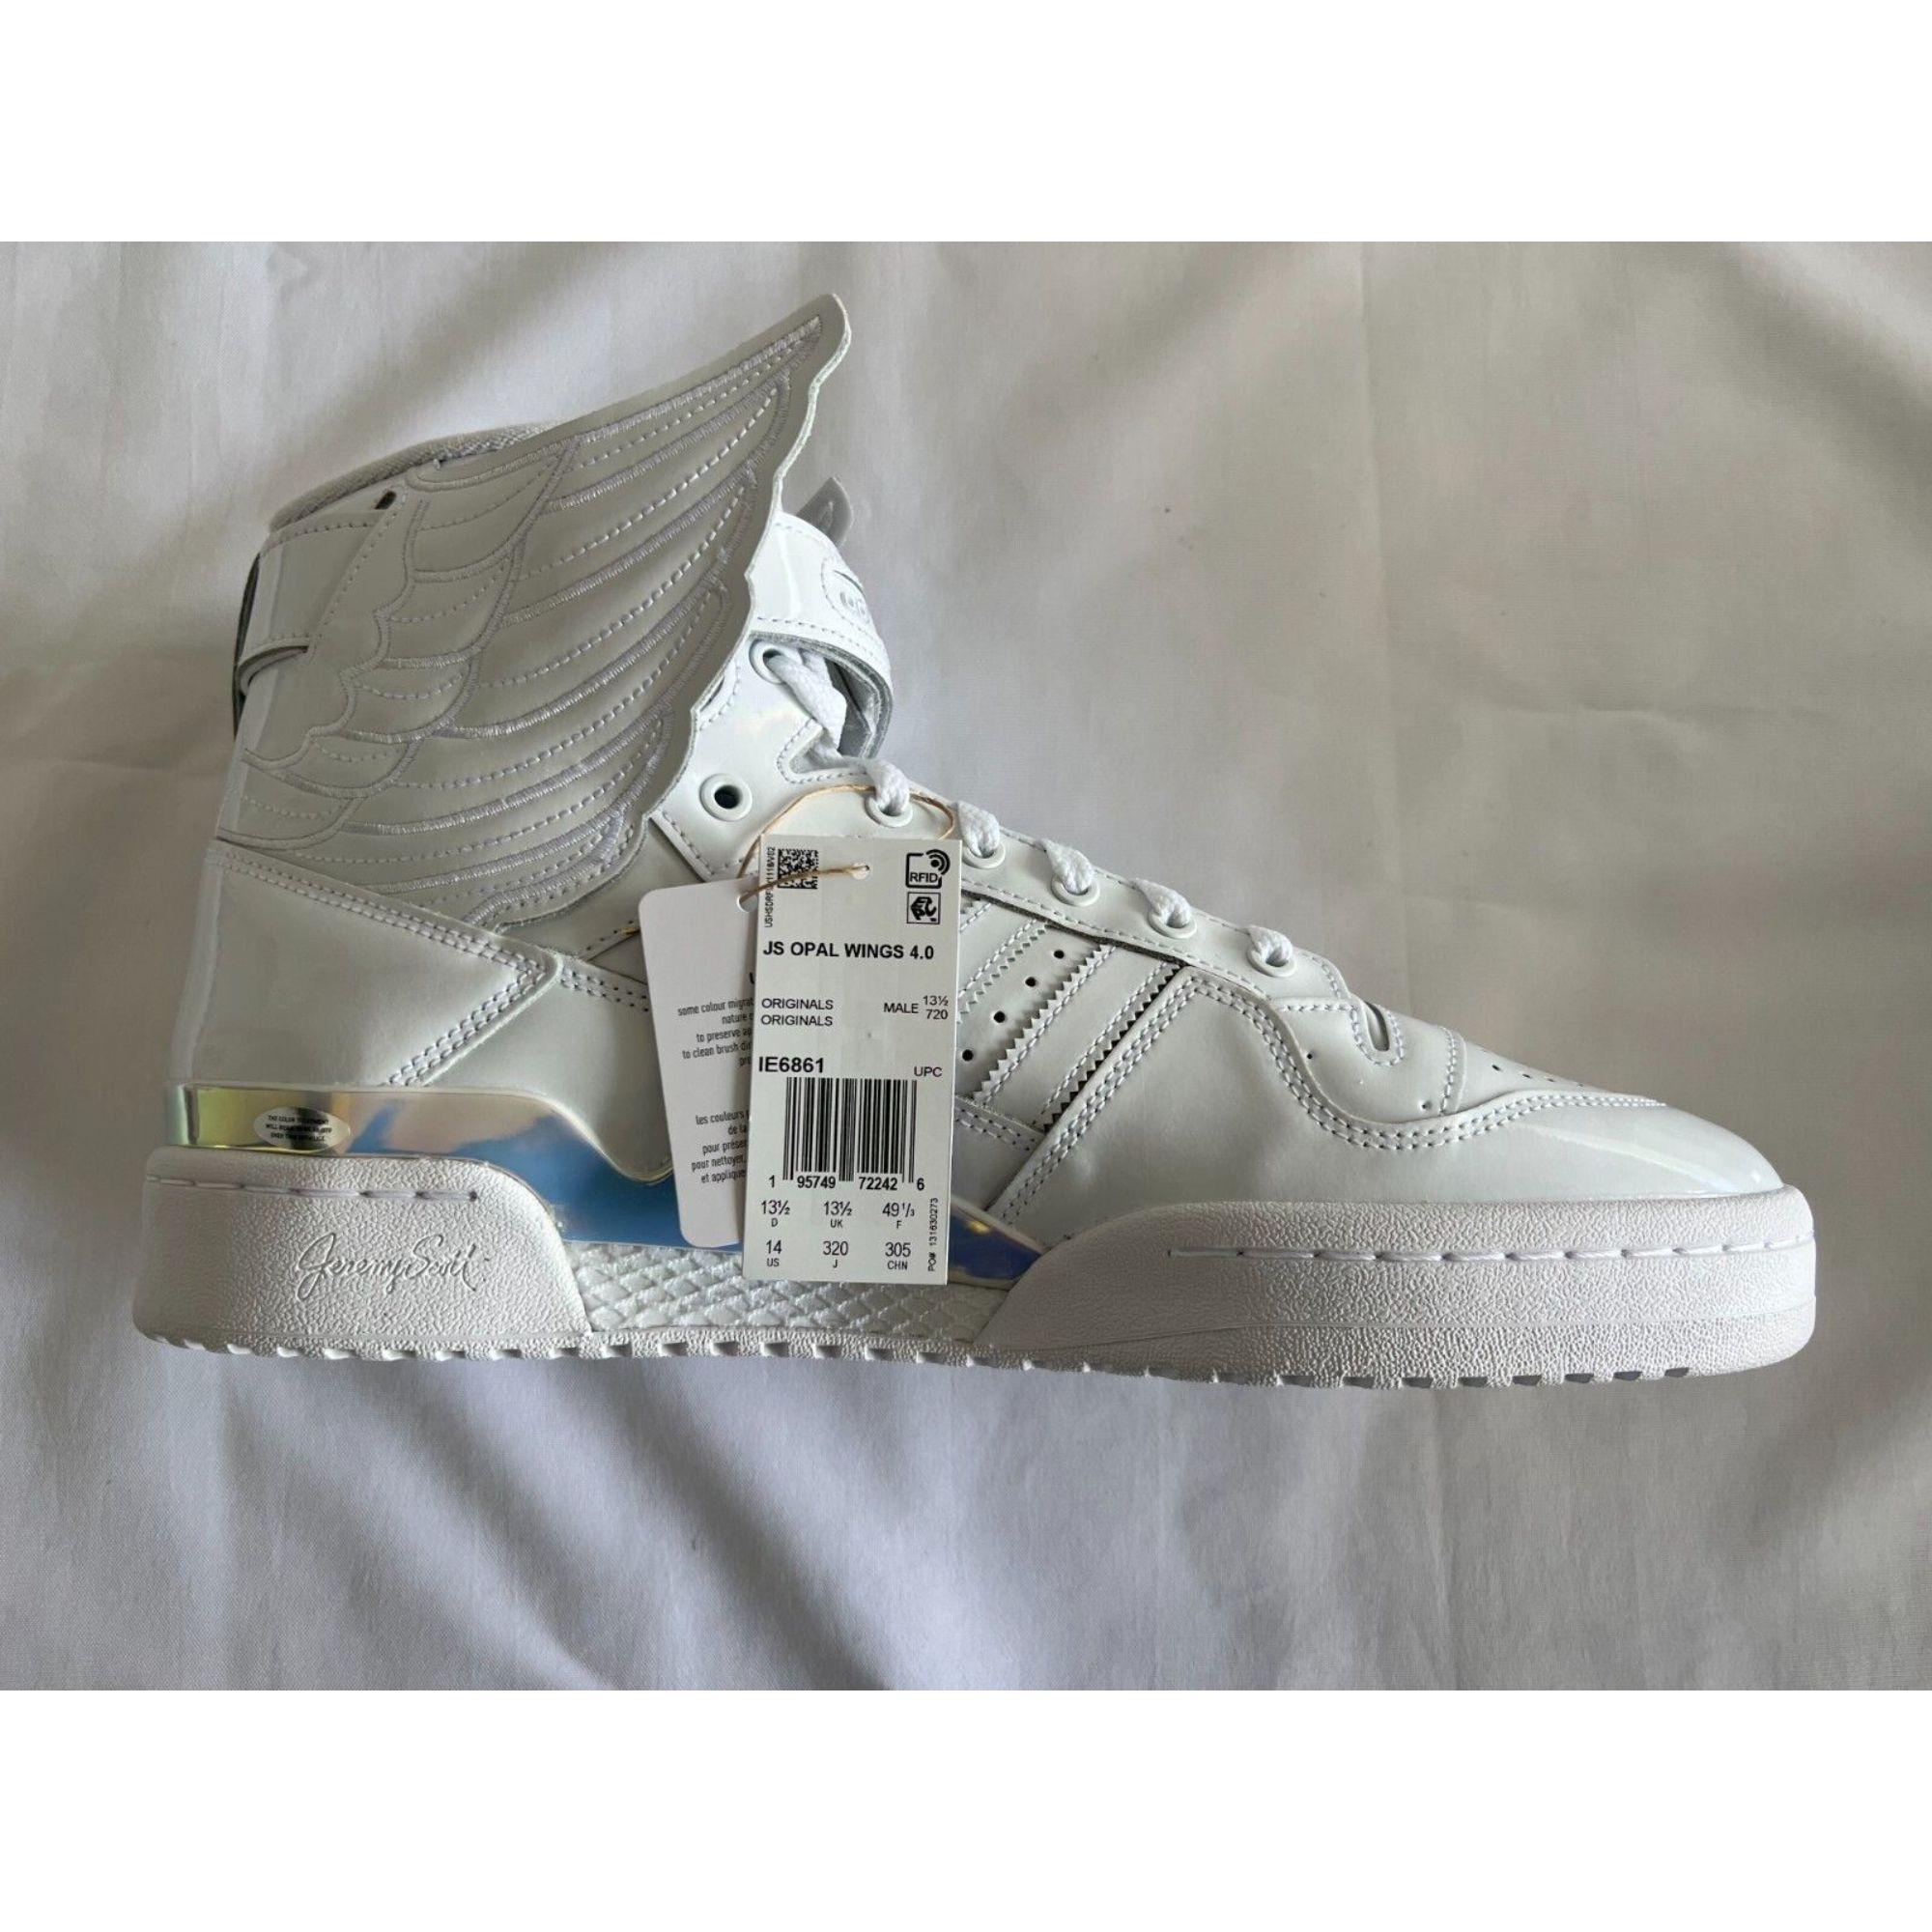 Adidas Originals ObyO Wings 4.0 Core Cloud Sneakers by Jeremy Scott, Size 14 For Sale 11